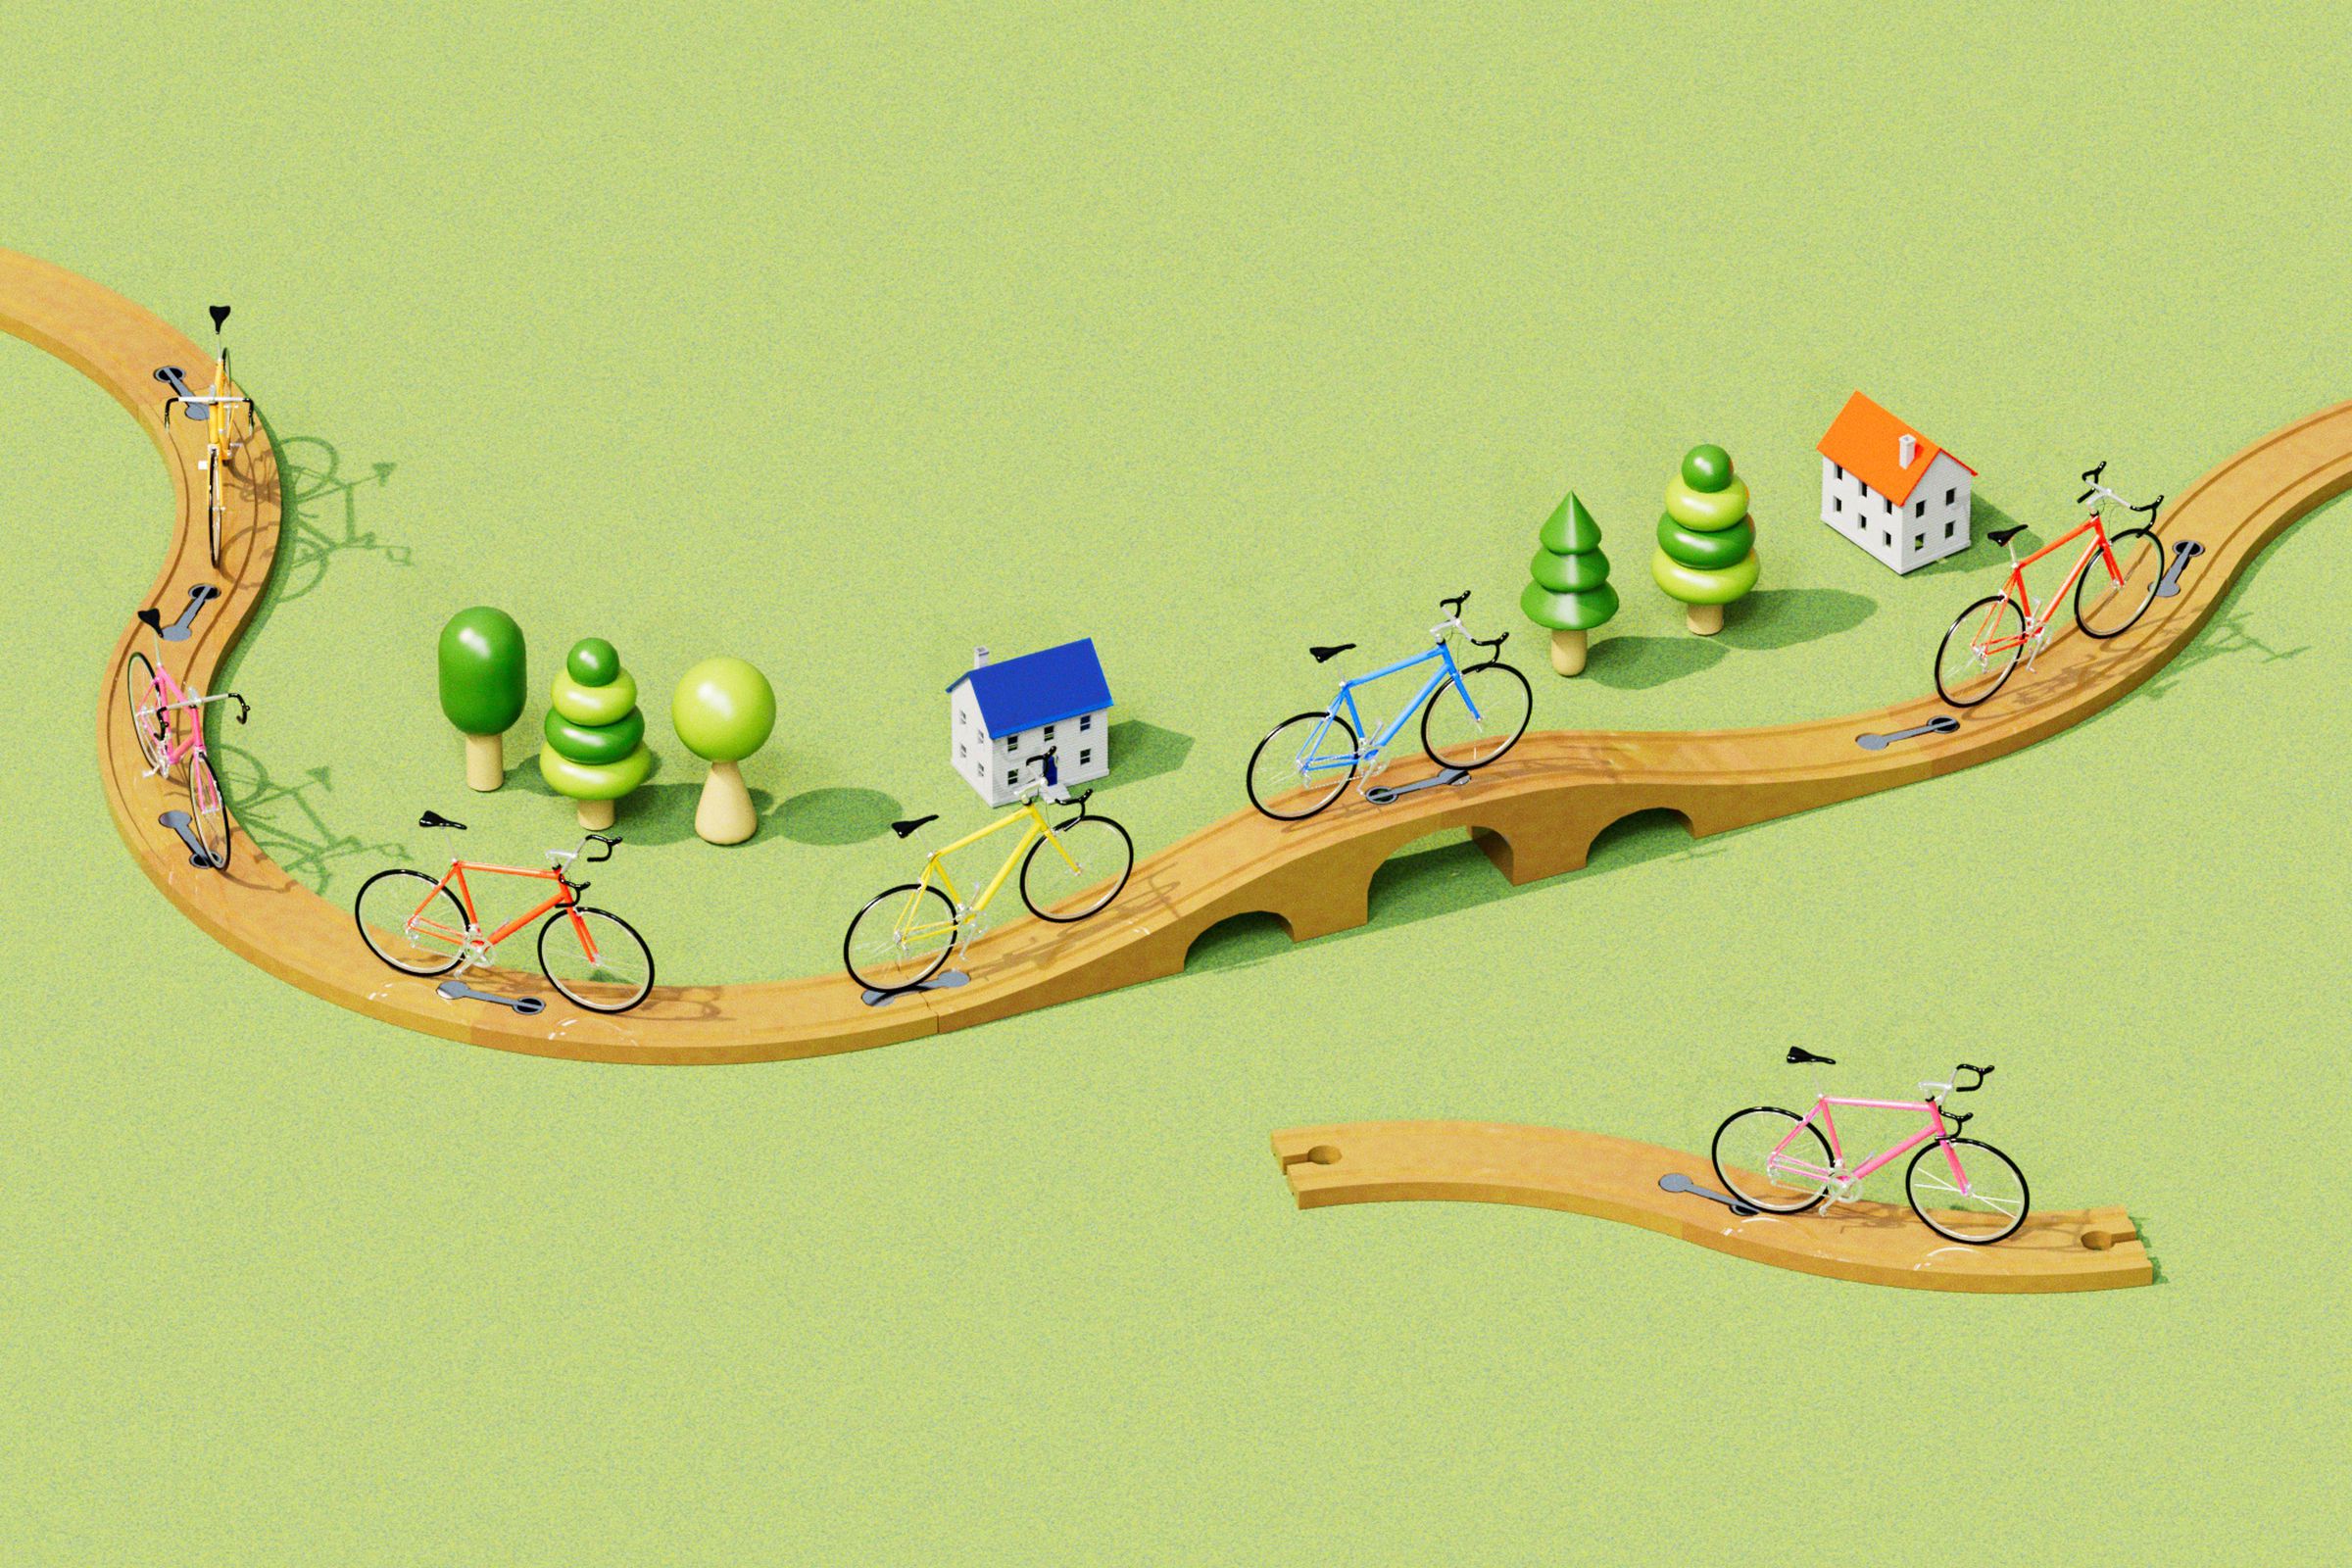 3D illustration showing a contrast between a community with a lot of bike infrastructure versus one without any.